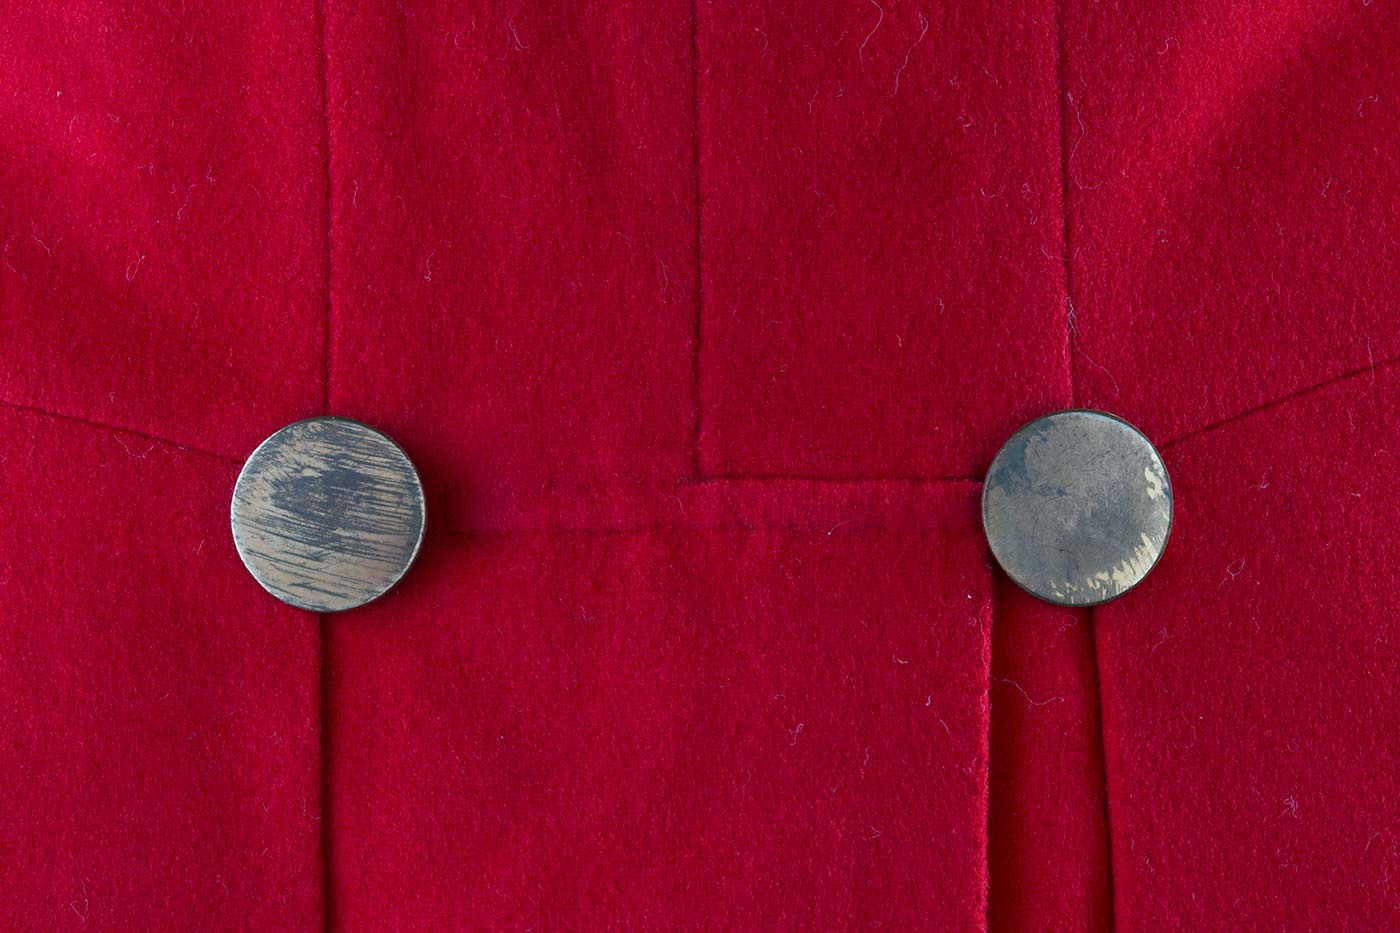 Details of buttons on a red coat. - click to view larger image